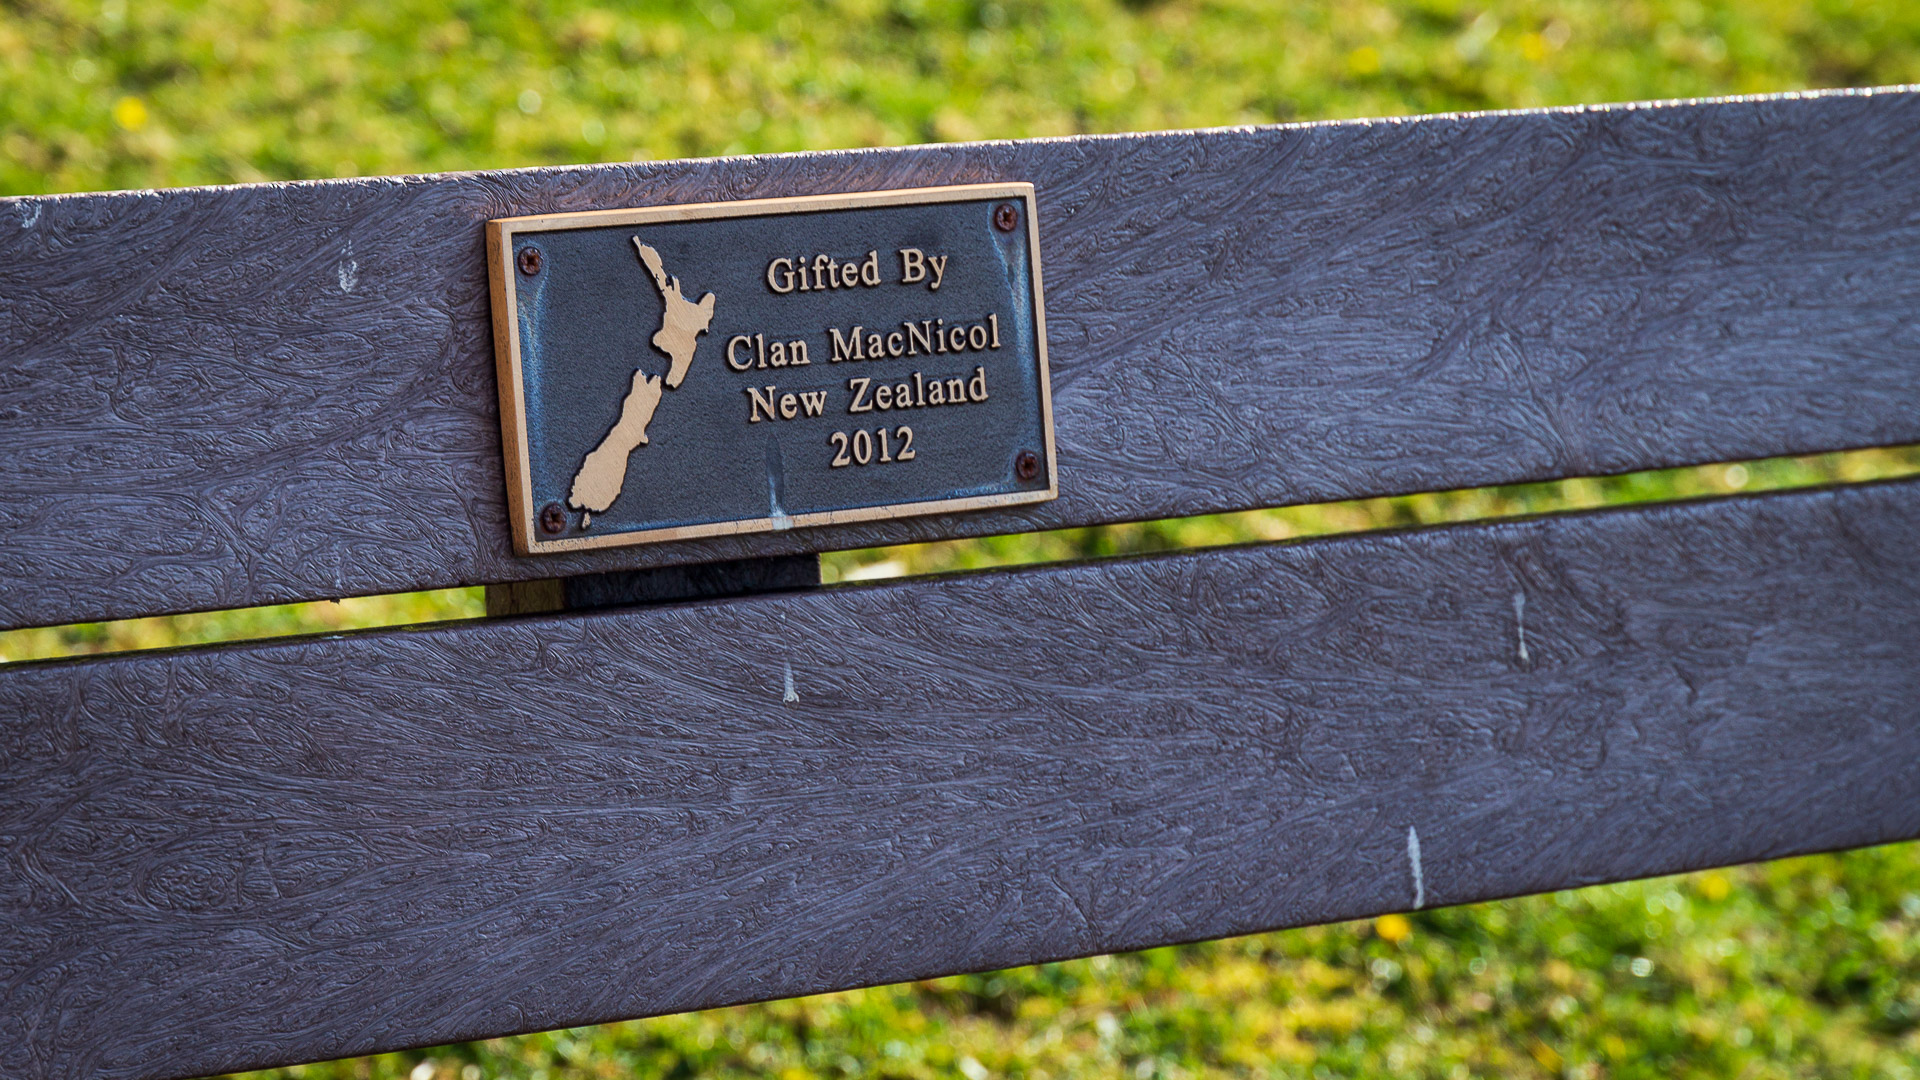 Clan members from New Zealand endowed this bench